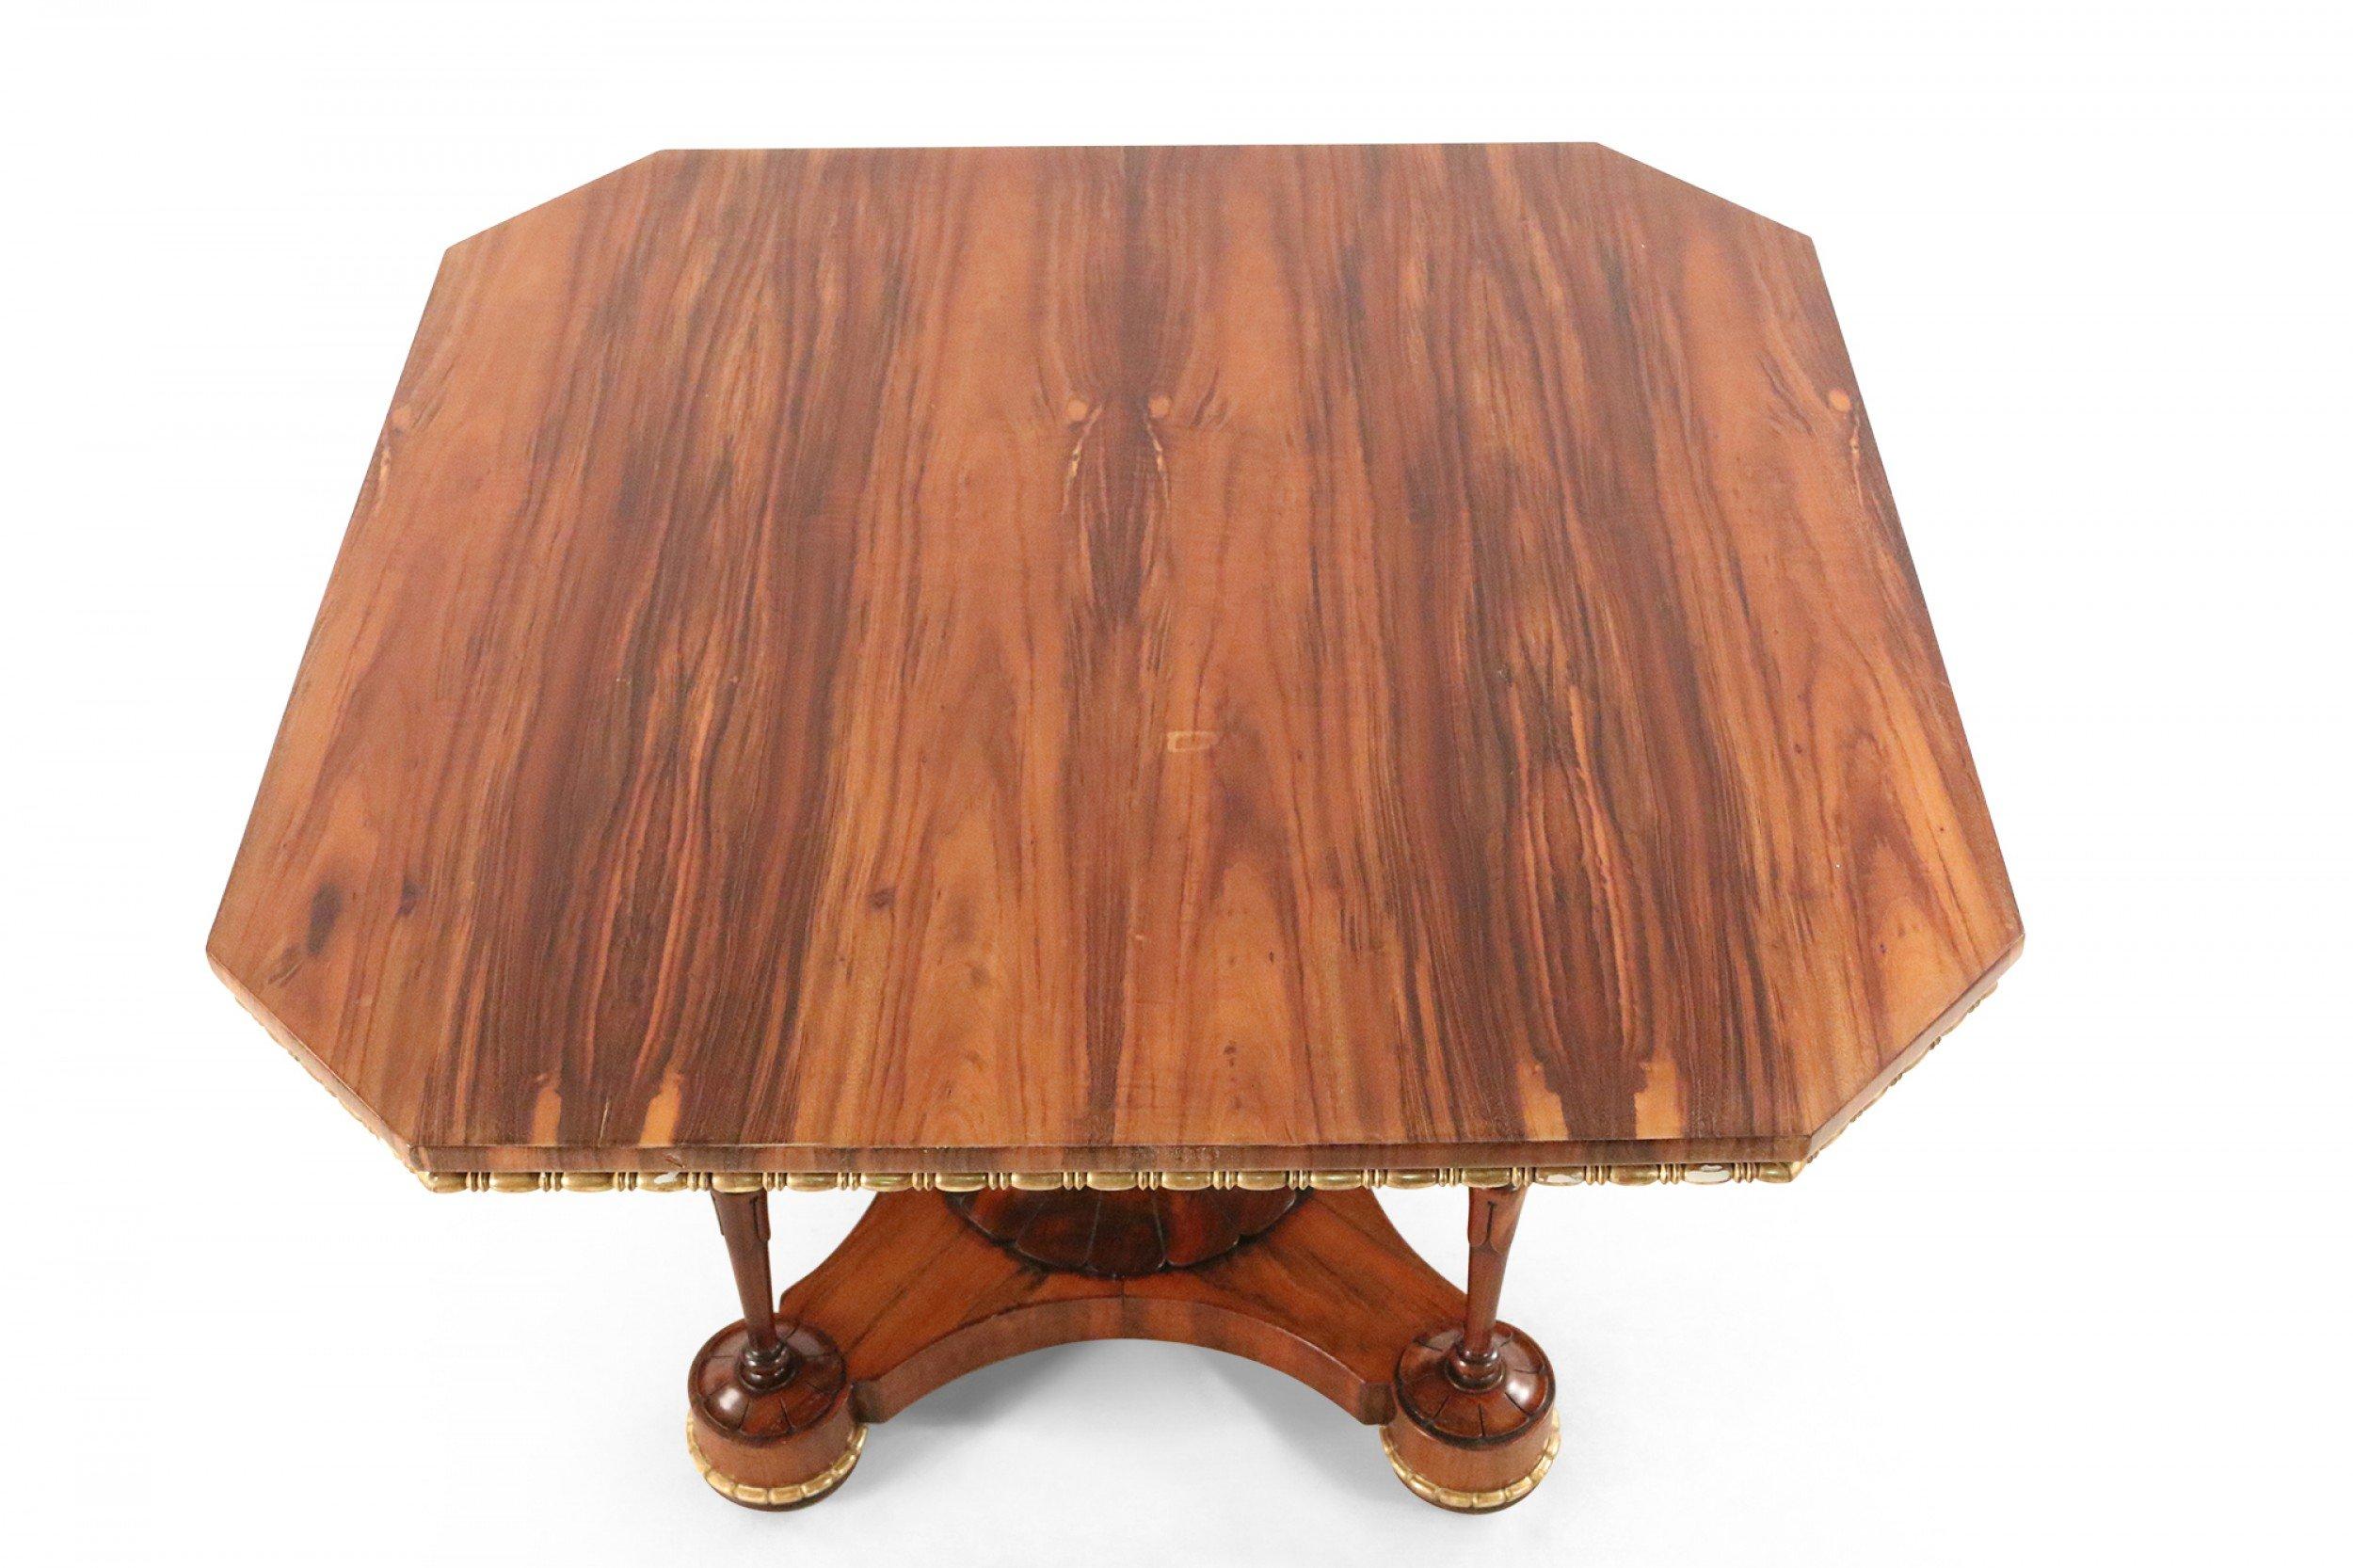 English Regency (circa 1850s) walnut and gilt trimmed center table with a square top and canted corners supported on a centered pedestal and 4 corner columns on a platform base (attributed to MOREL & SEDDON) (Domestic Shipping Only).